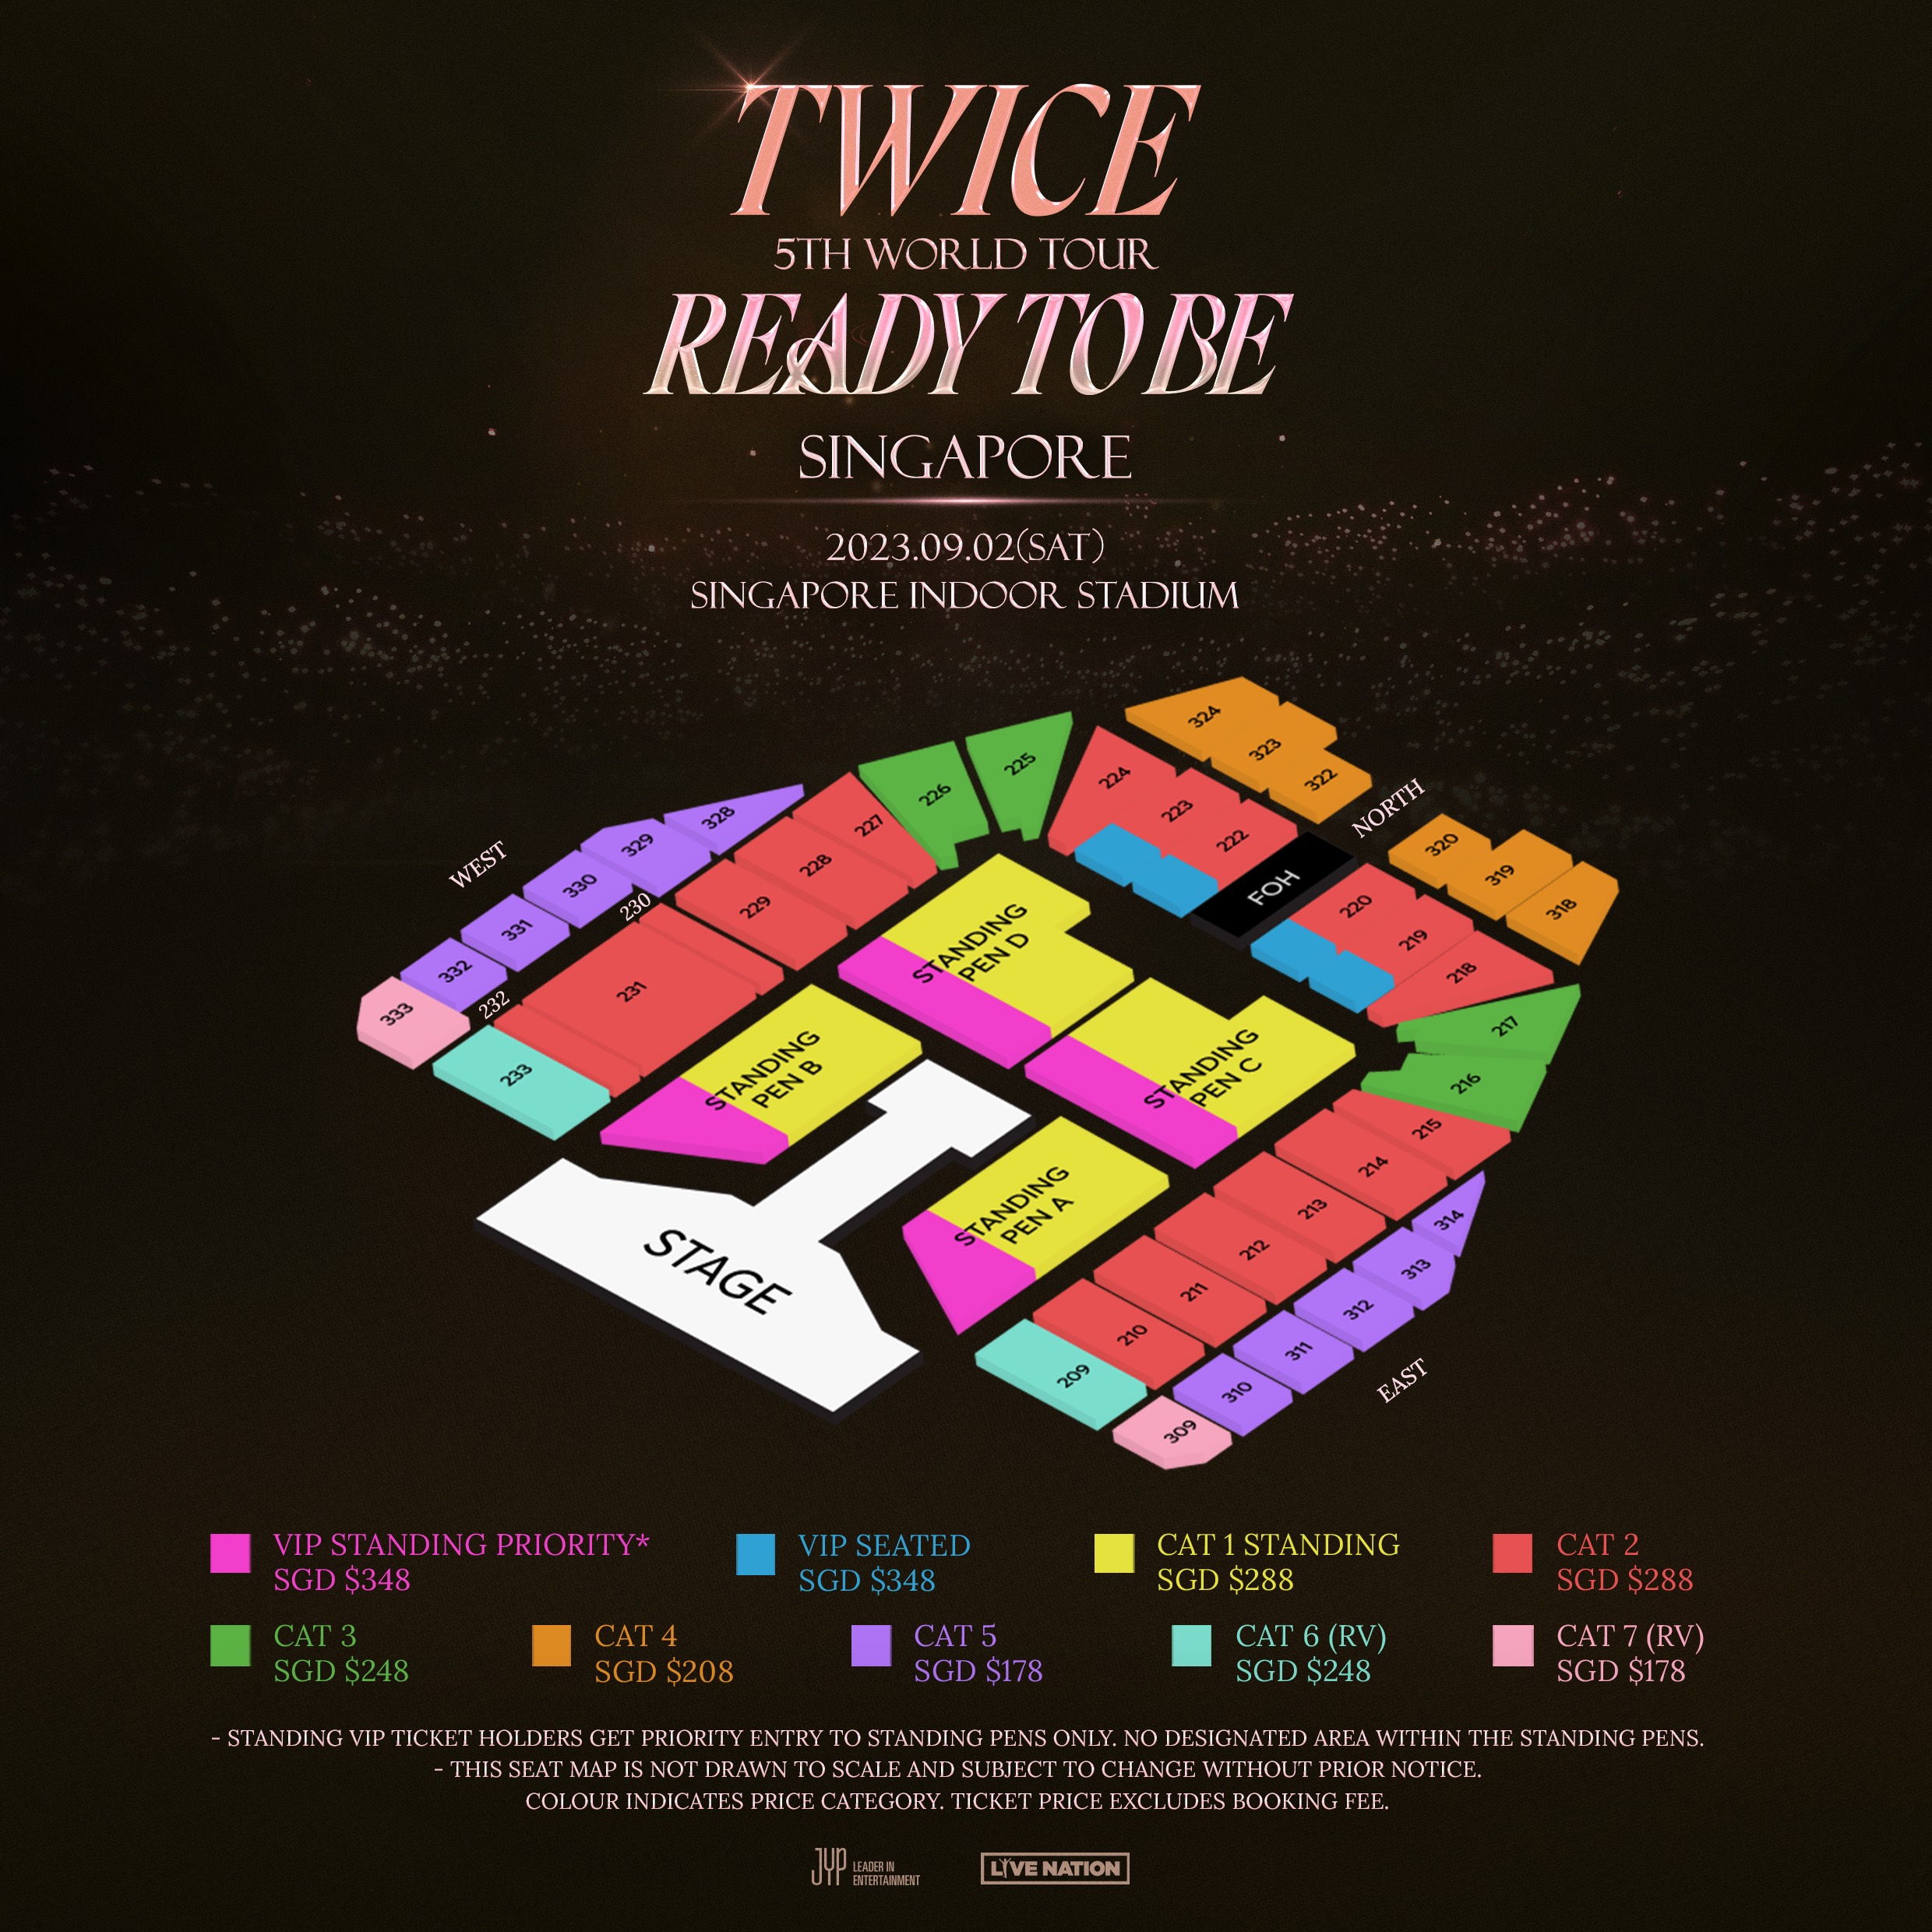 Kpop group TWICE S'pore concert tickets on sale from Jun. 8